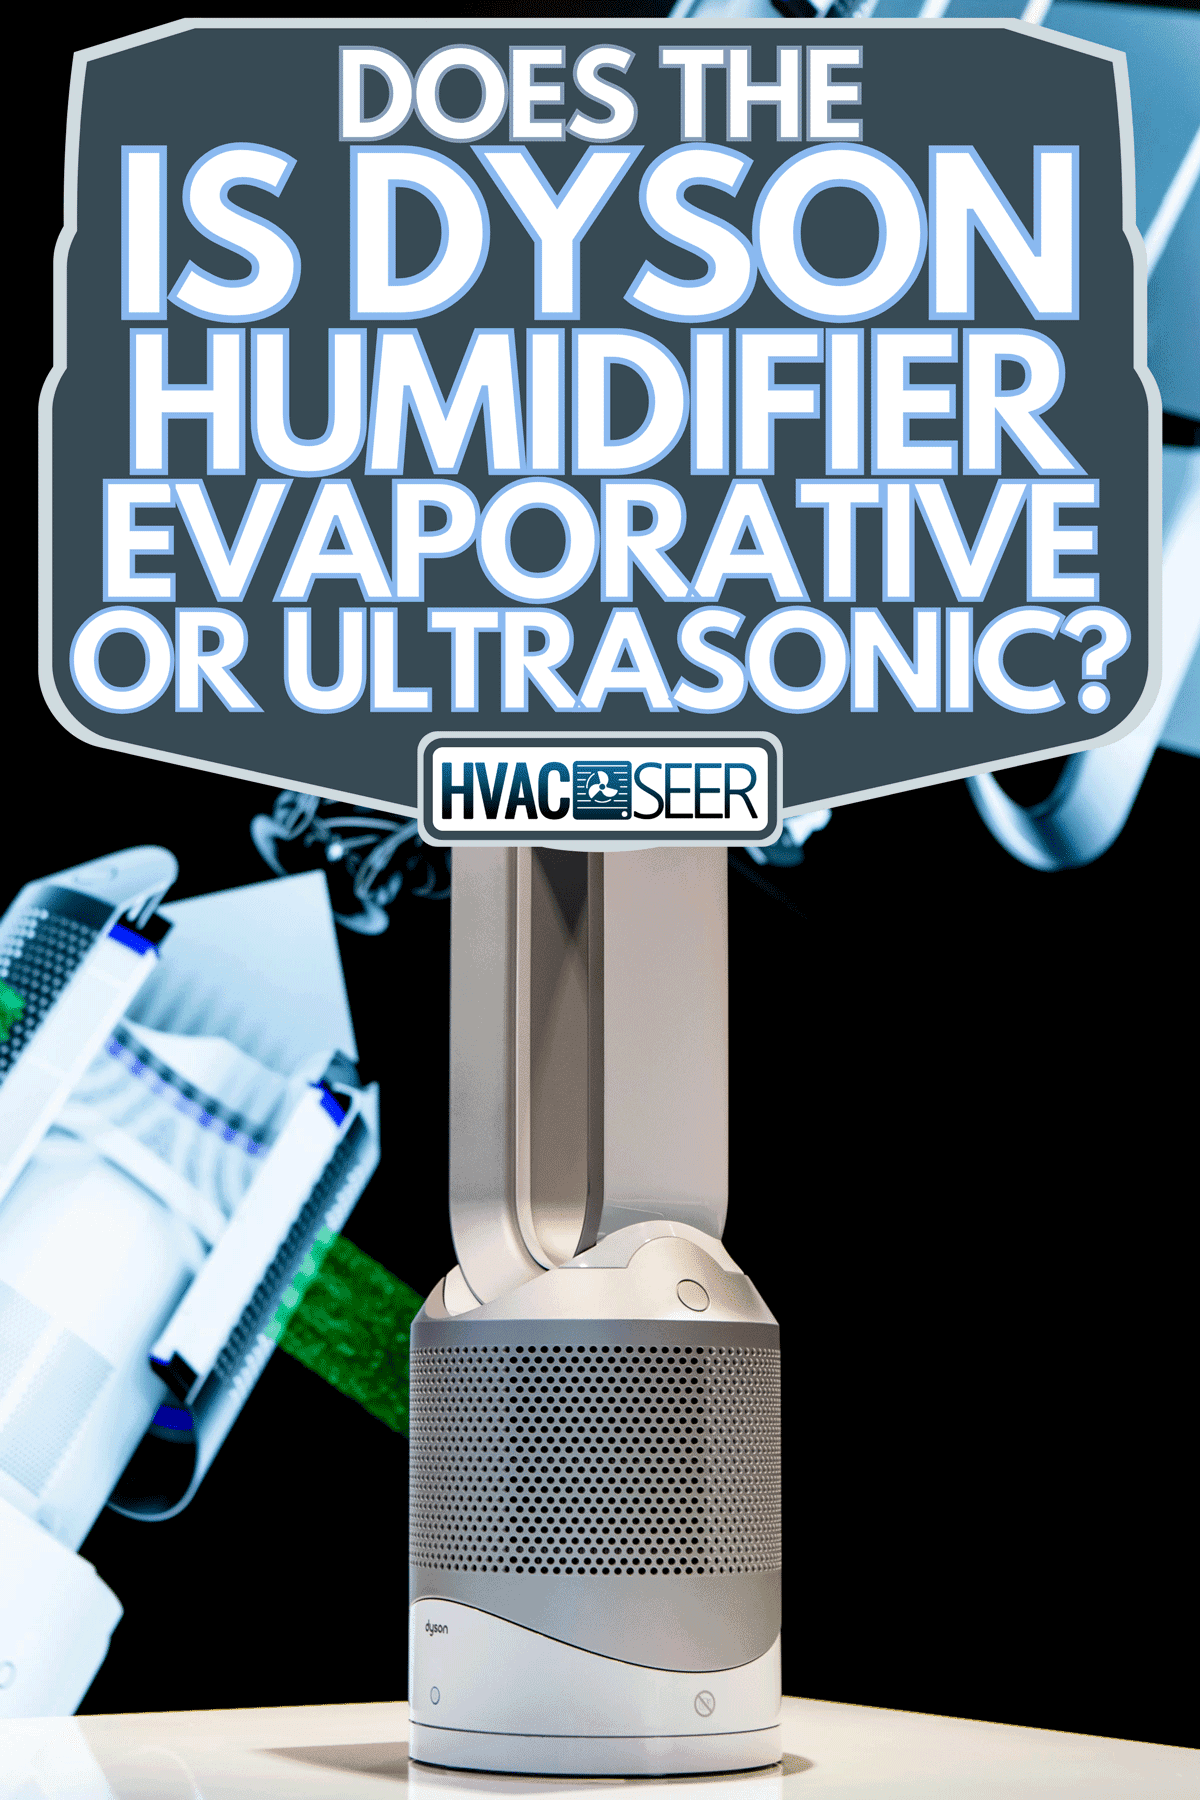 Exhibition of dyson air humidifier, Is Dyson Humidifier Evaporative Or Ultrasonic?